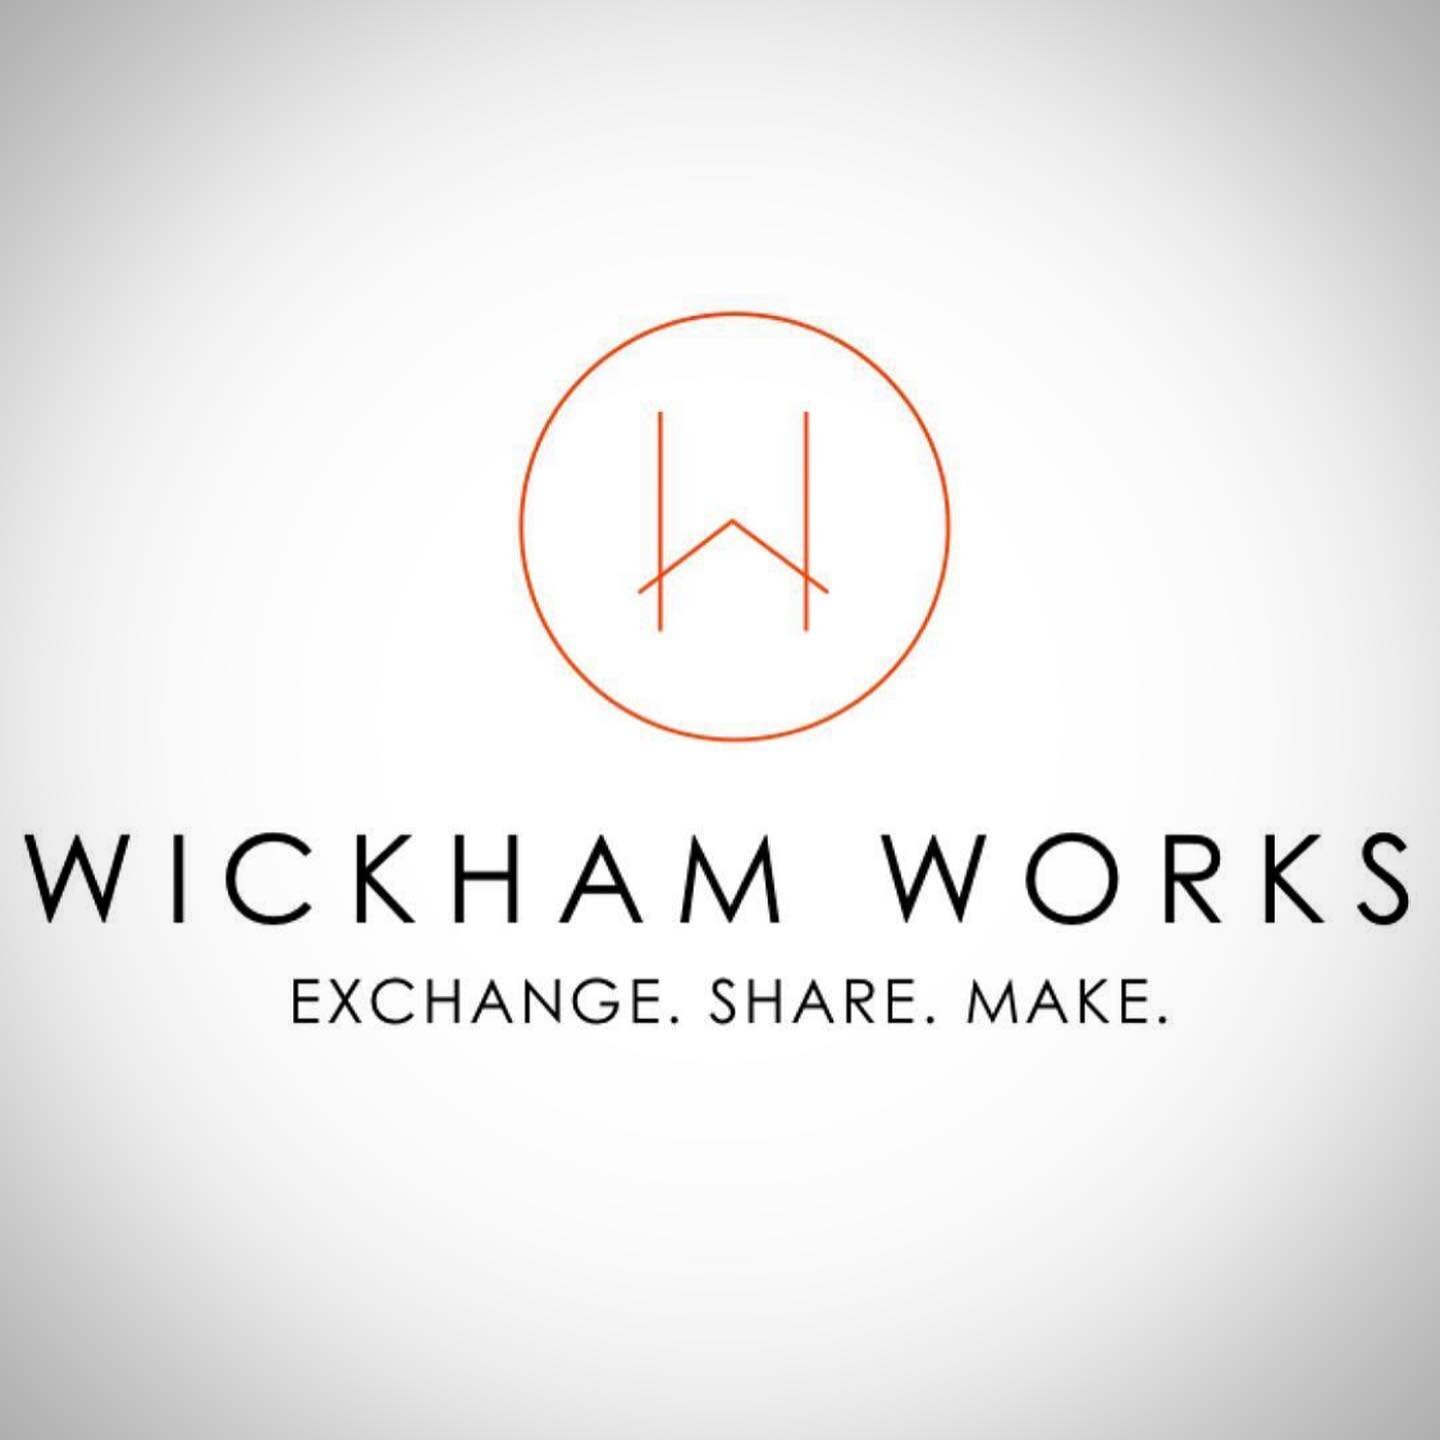 What an honor and privilege it is to be the newest board member of Wickham Works - an art organization and makers space committed to building community through the arts. @wickhamworksmakerspace is responsible for the creation, curation, planning and 